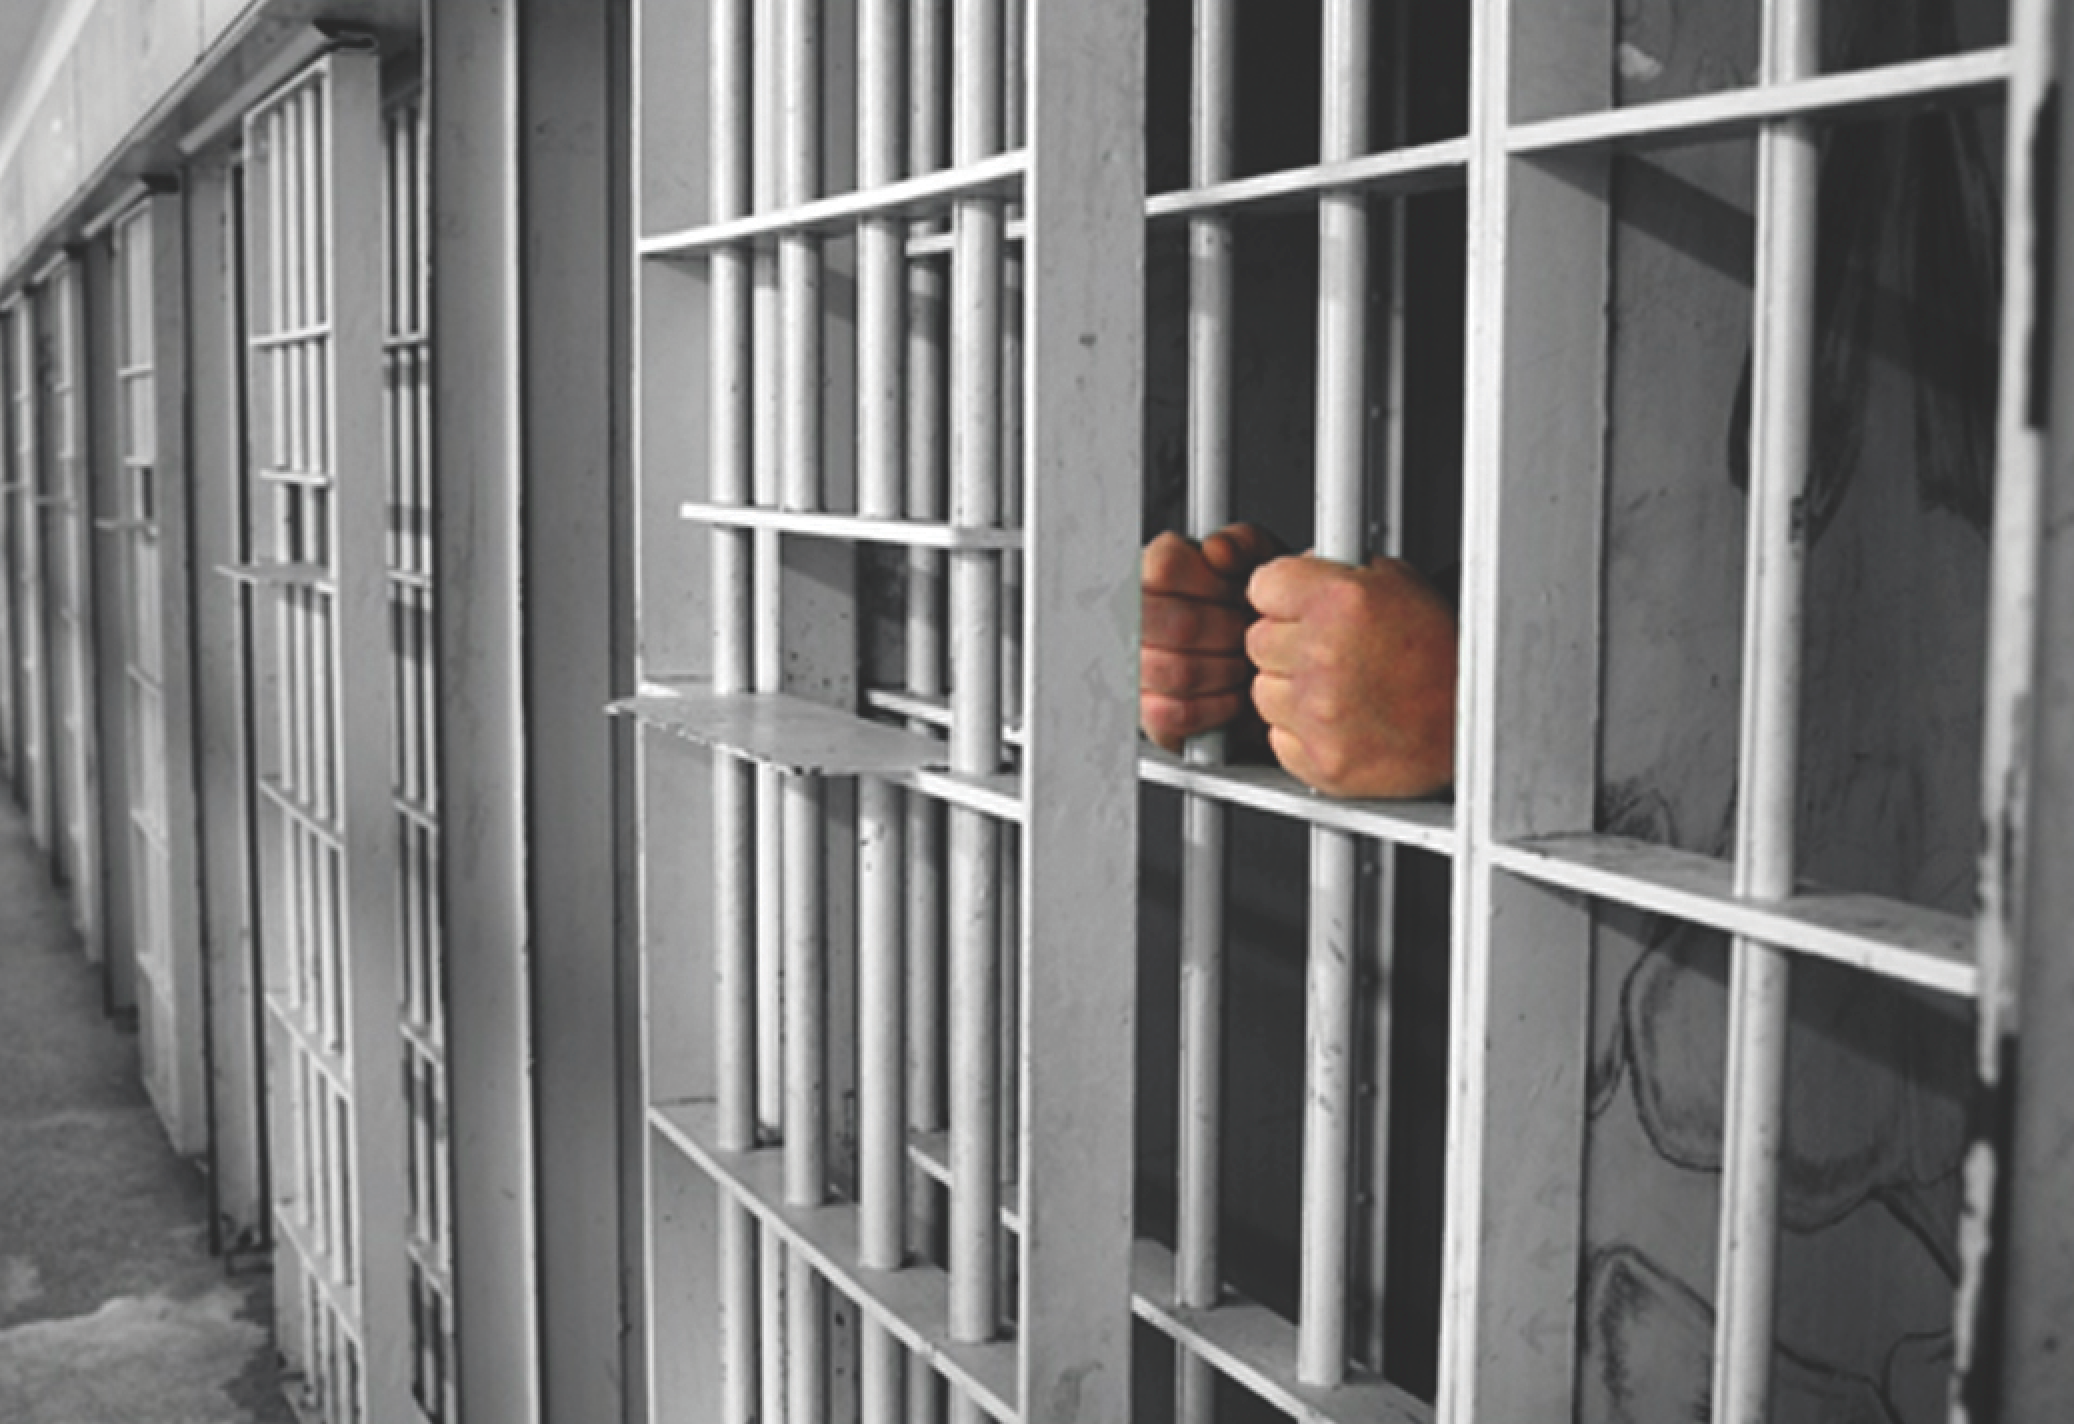 Prison Cell (Stock Image)